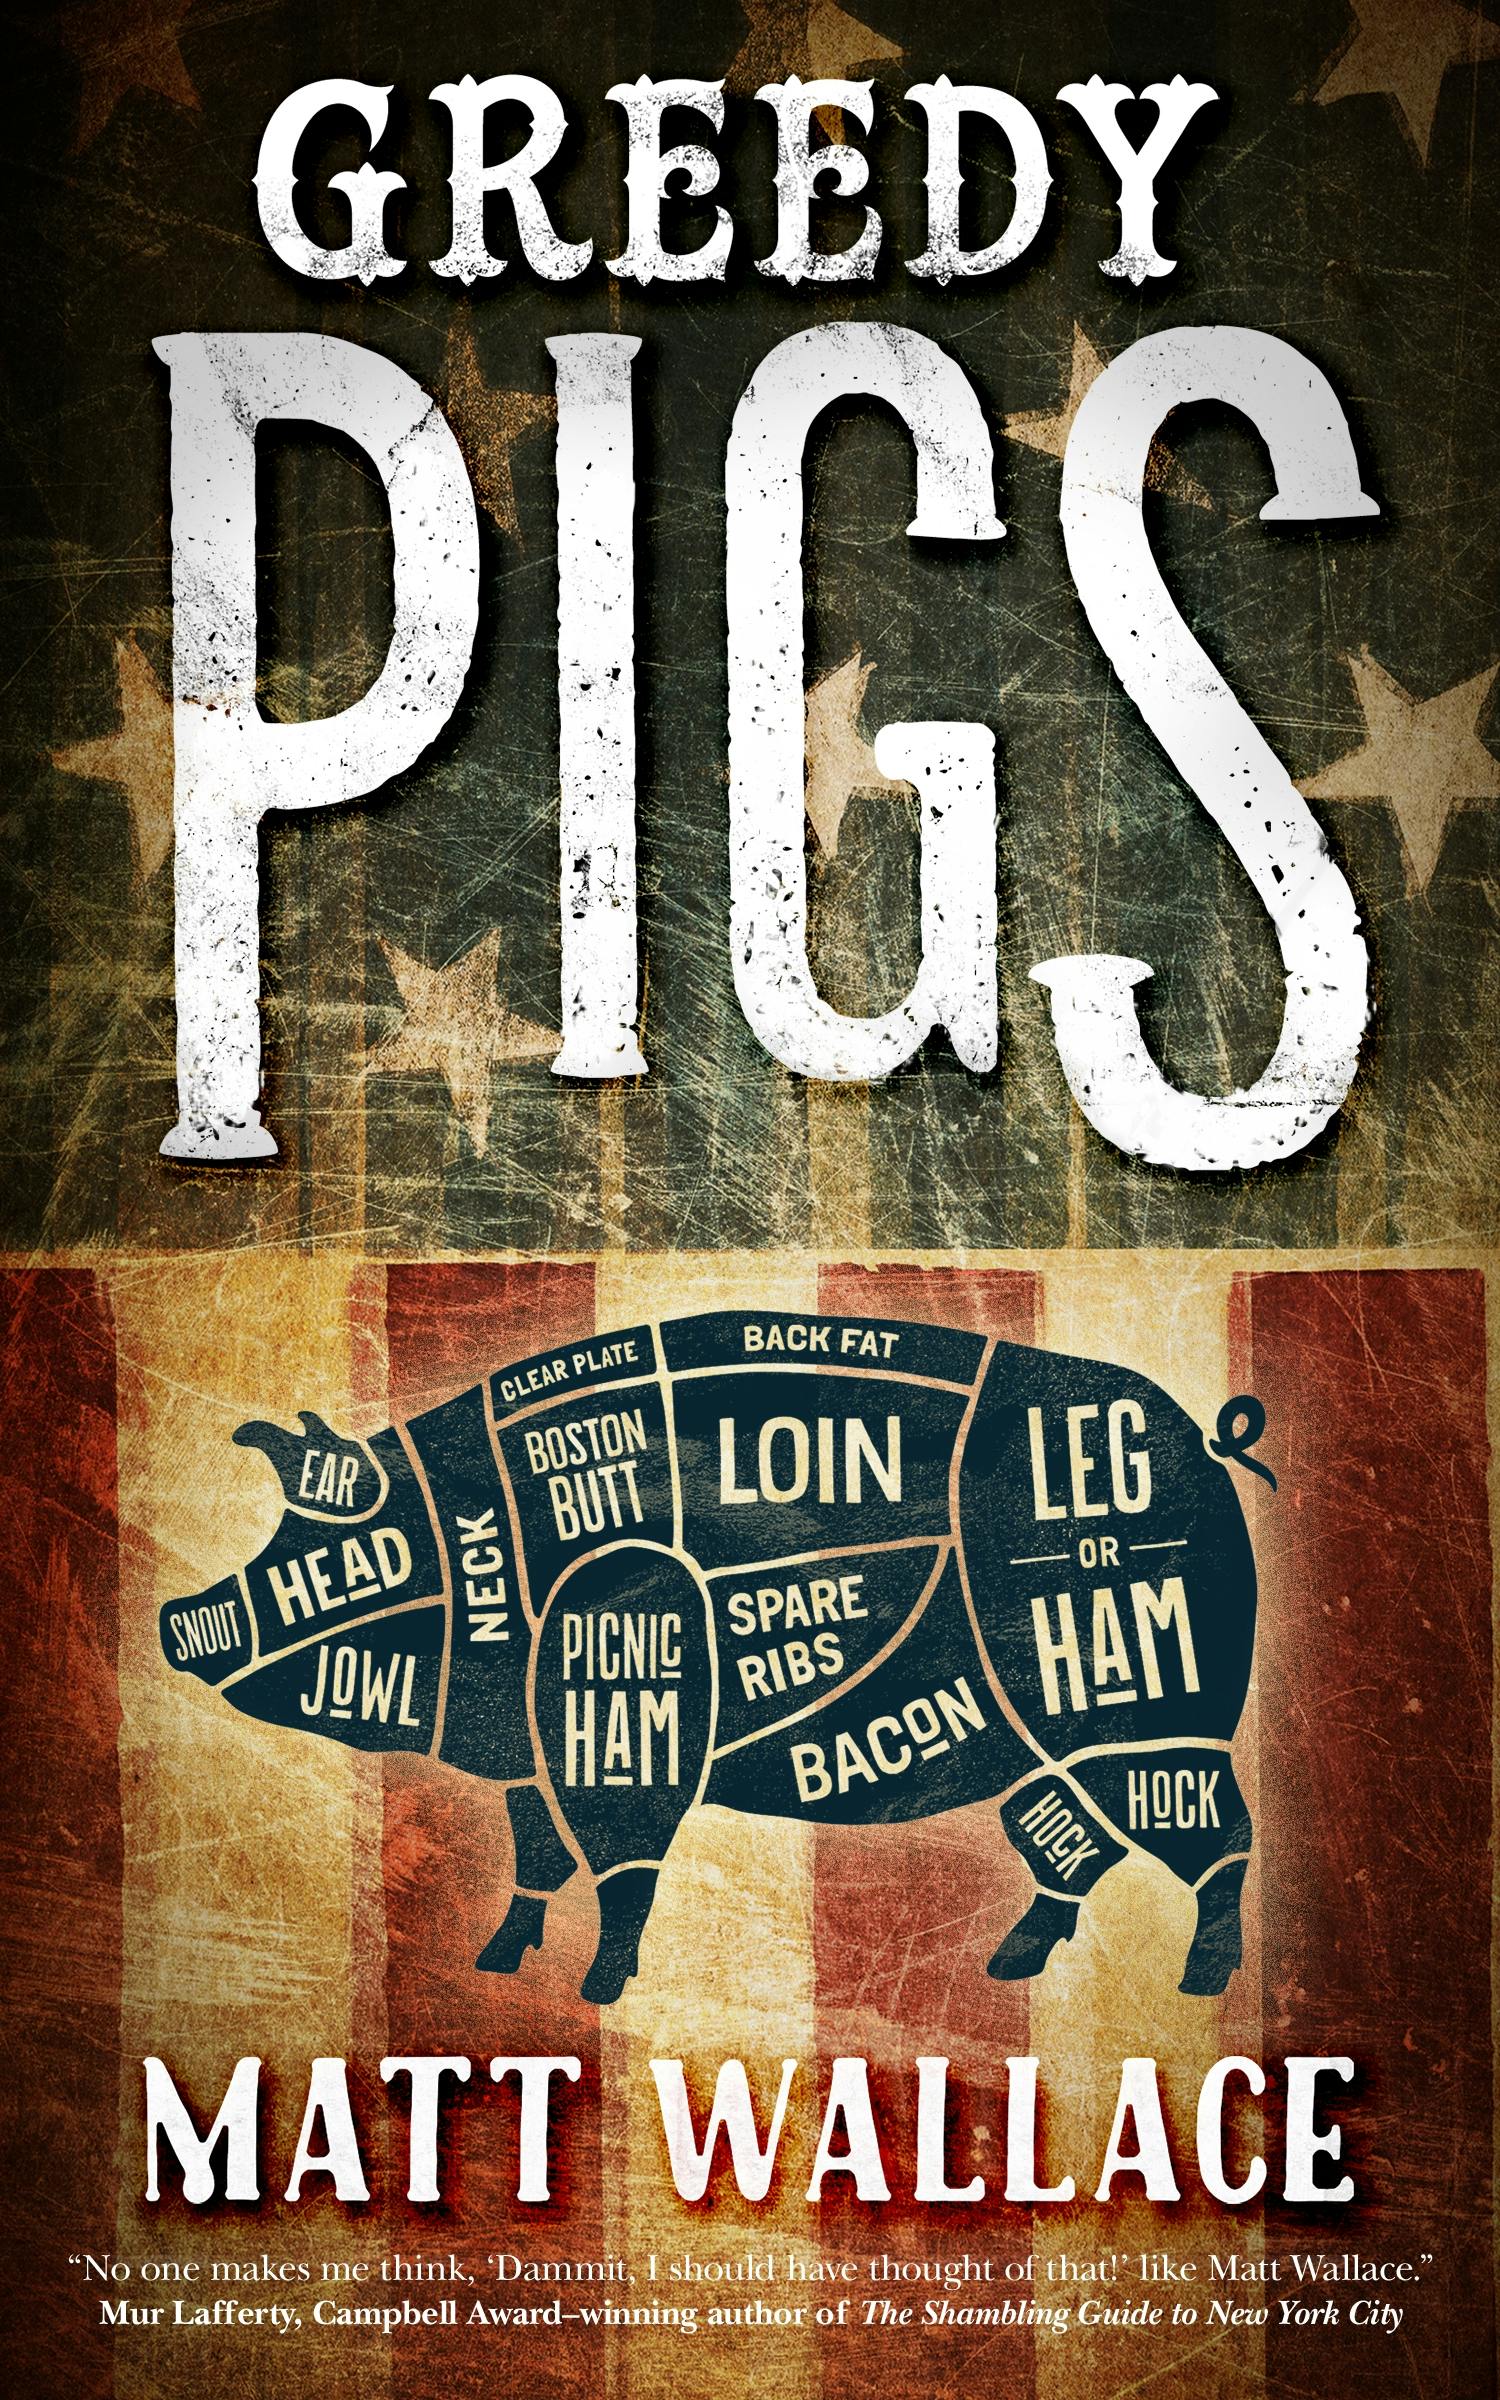 Cover for the book titled as: Greedy Pigs